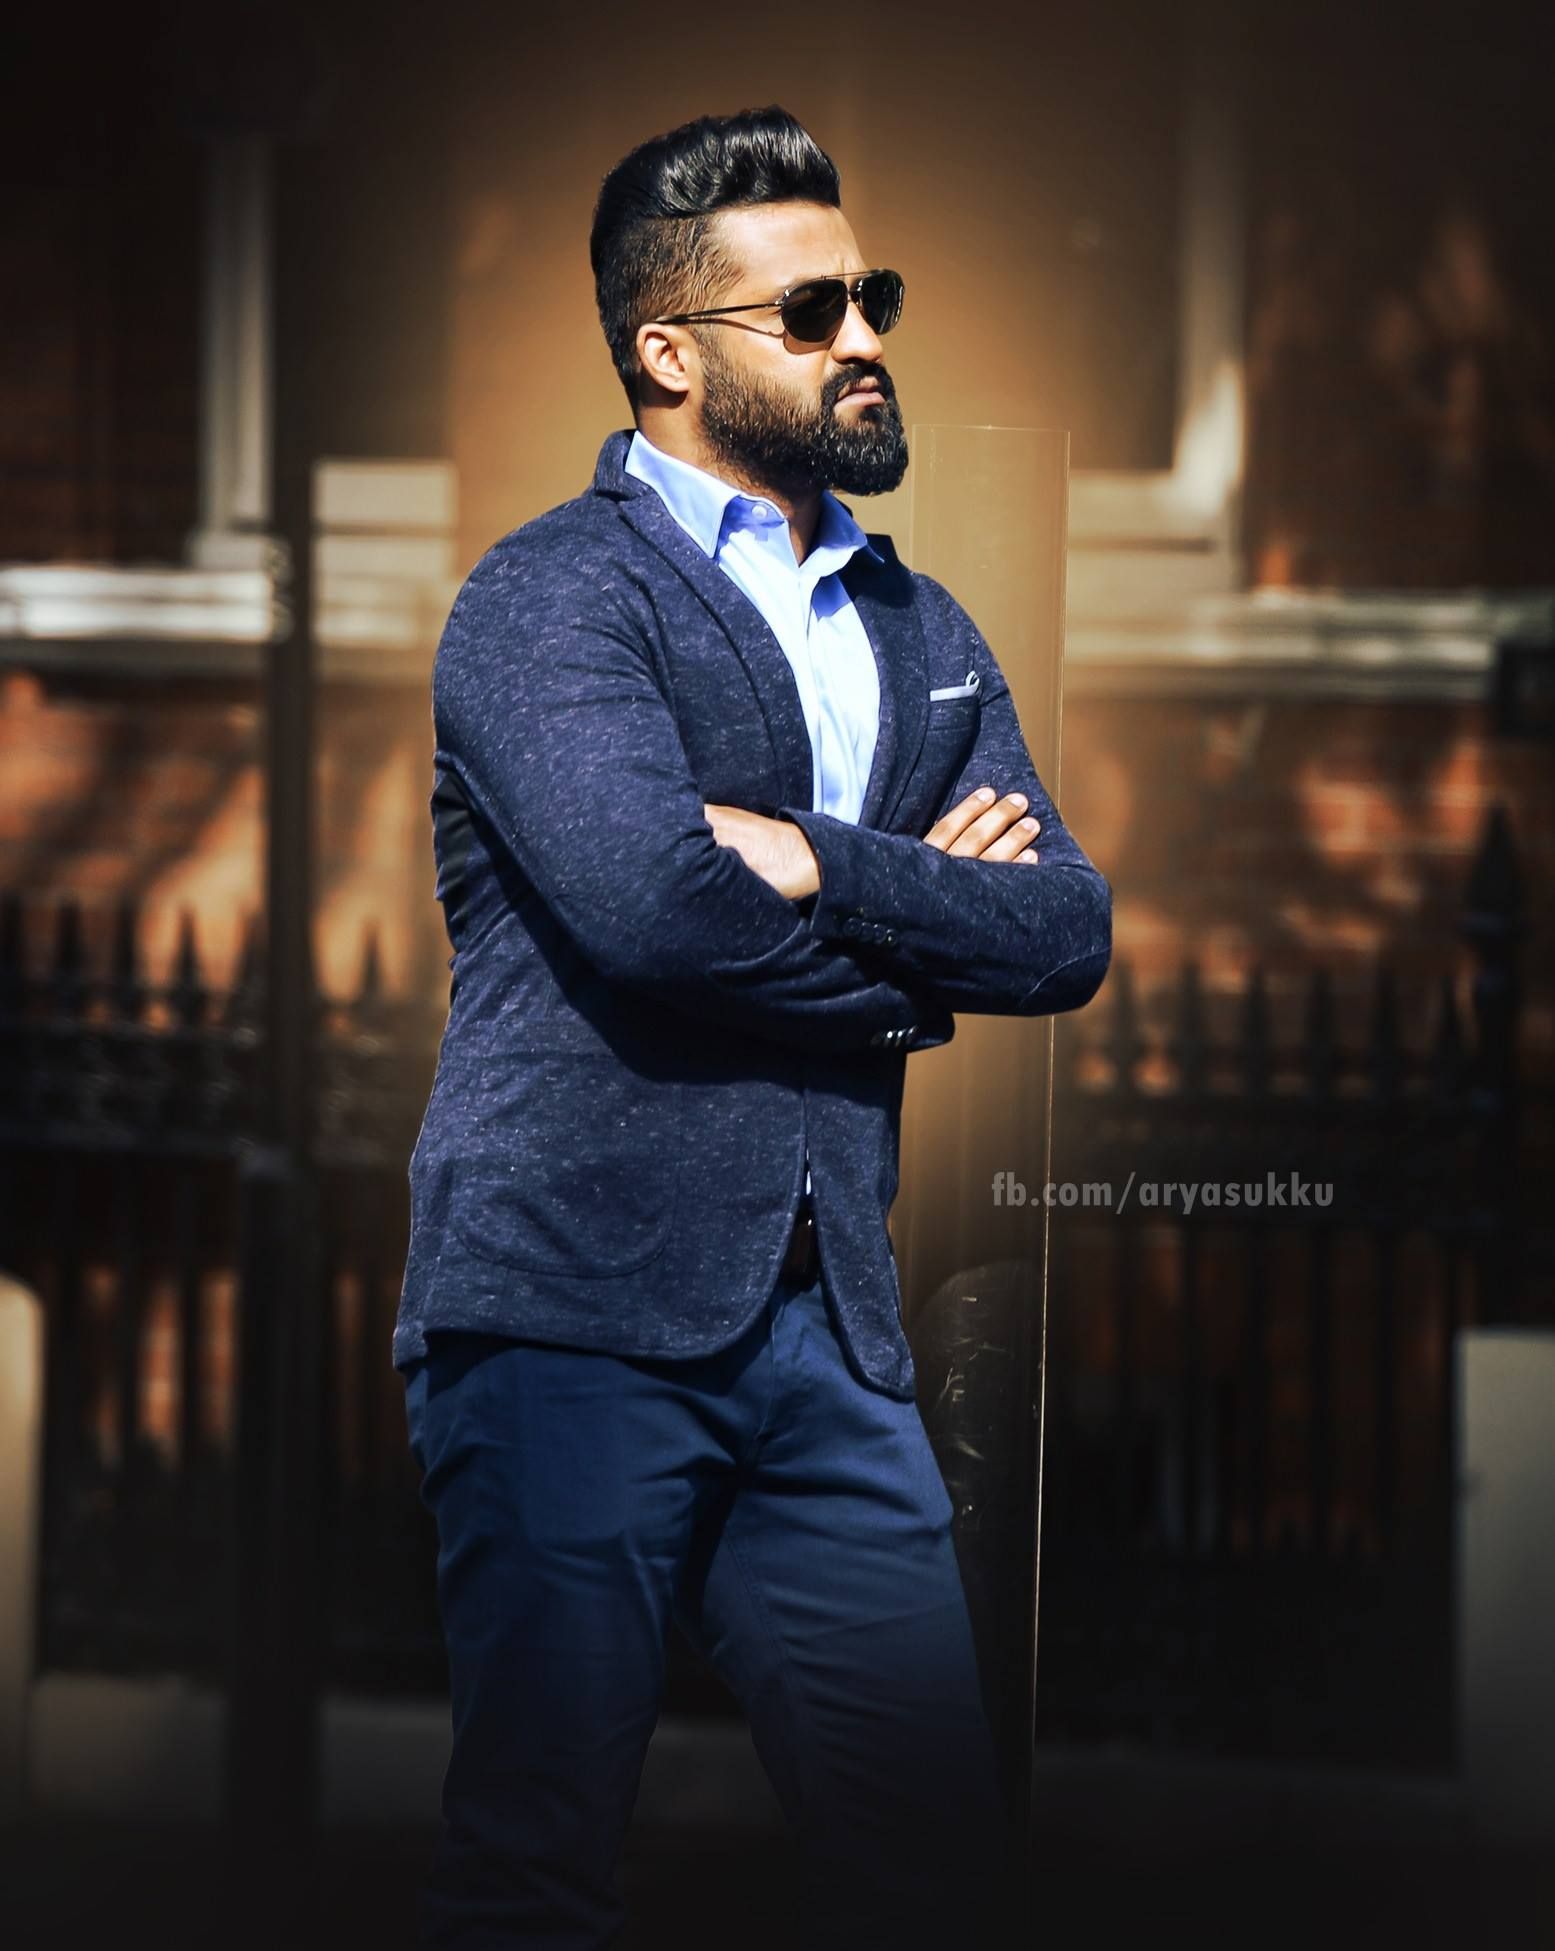 jr ntr wallpapers for mobile,suit,formal wear,cool,photography,white collar worker